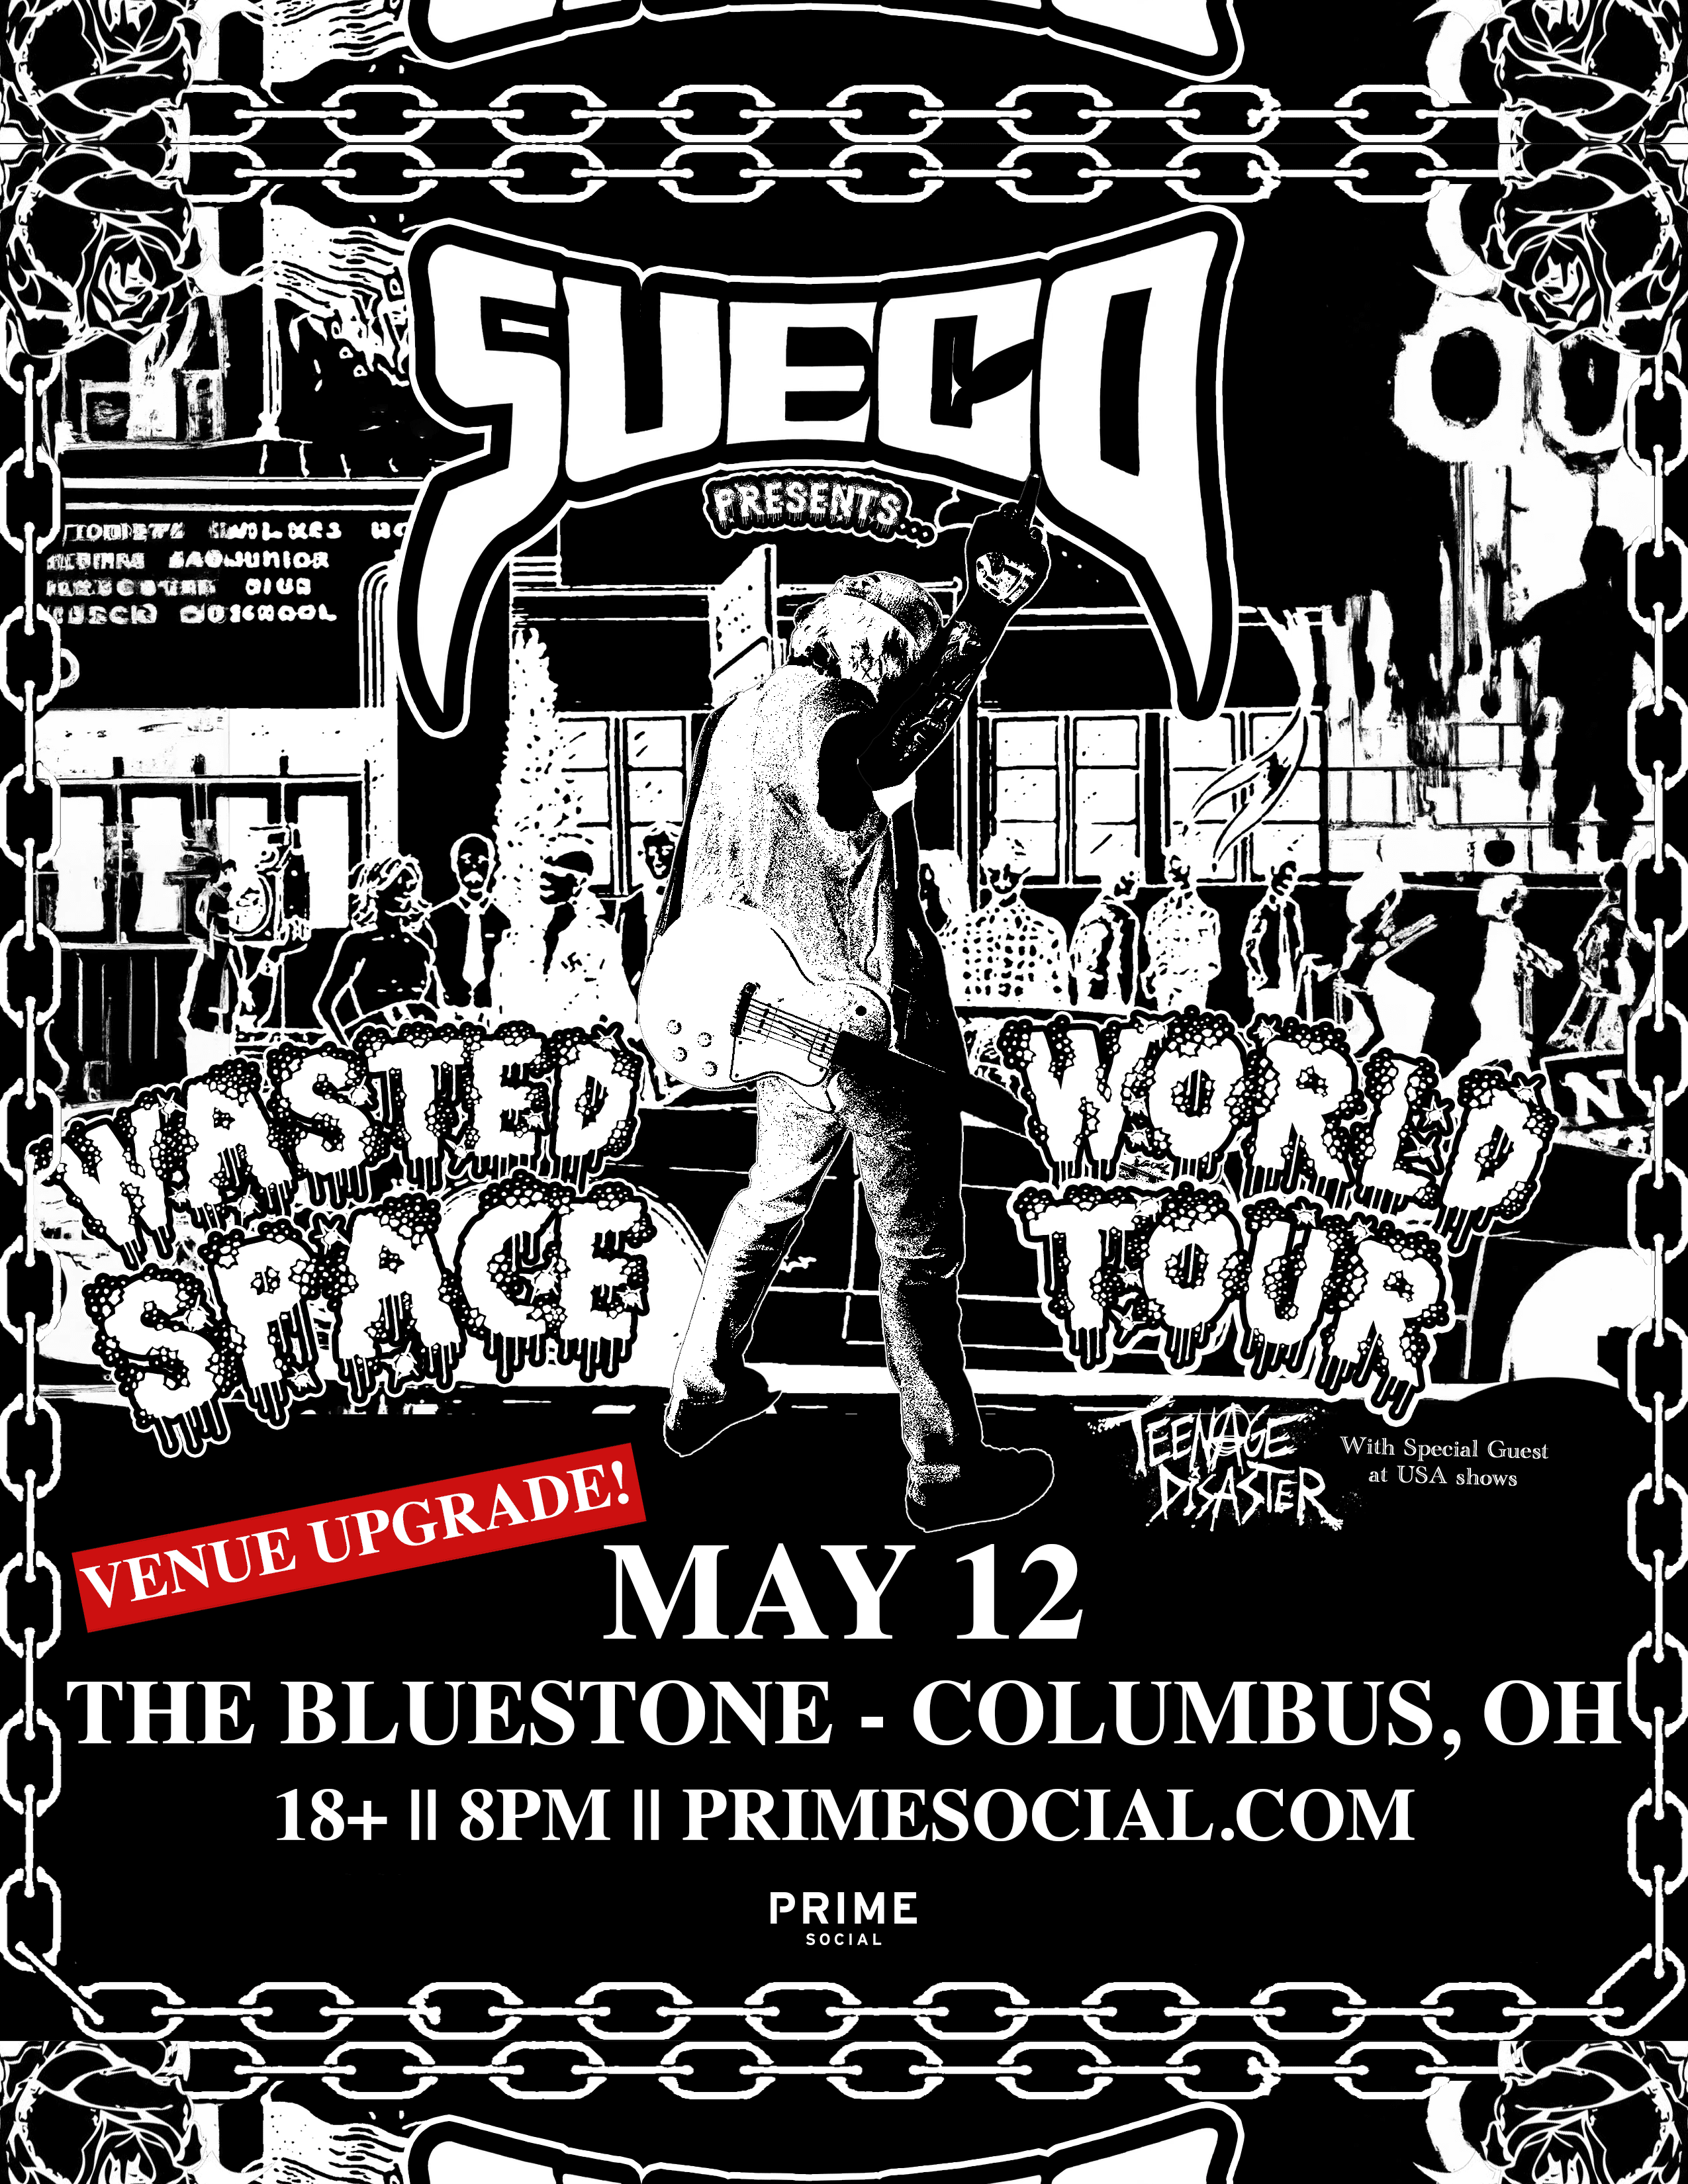 wasted space tour sueco